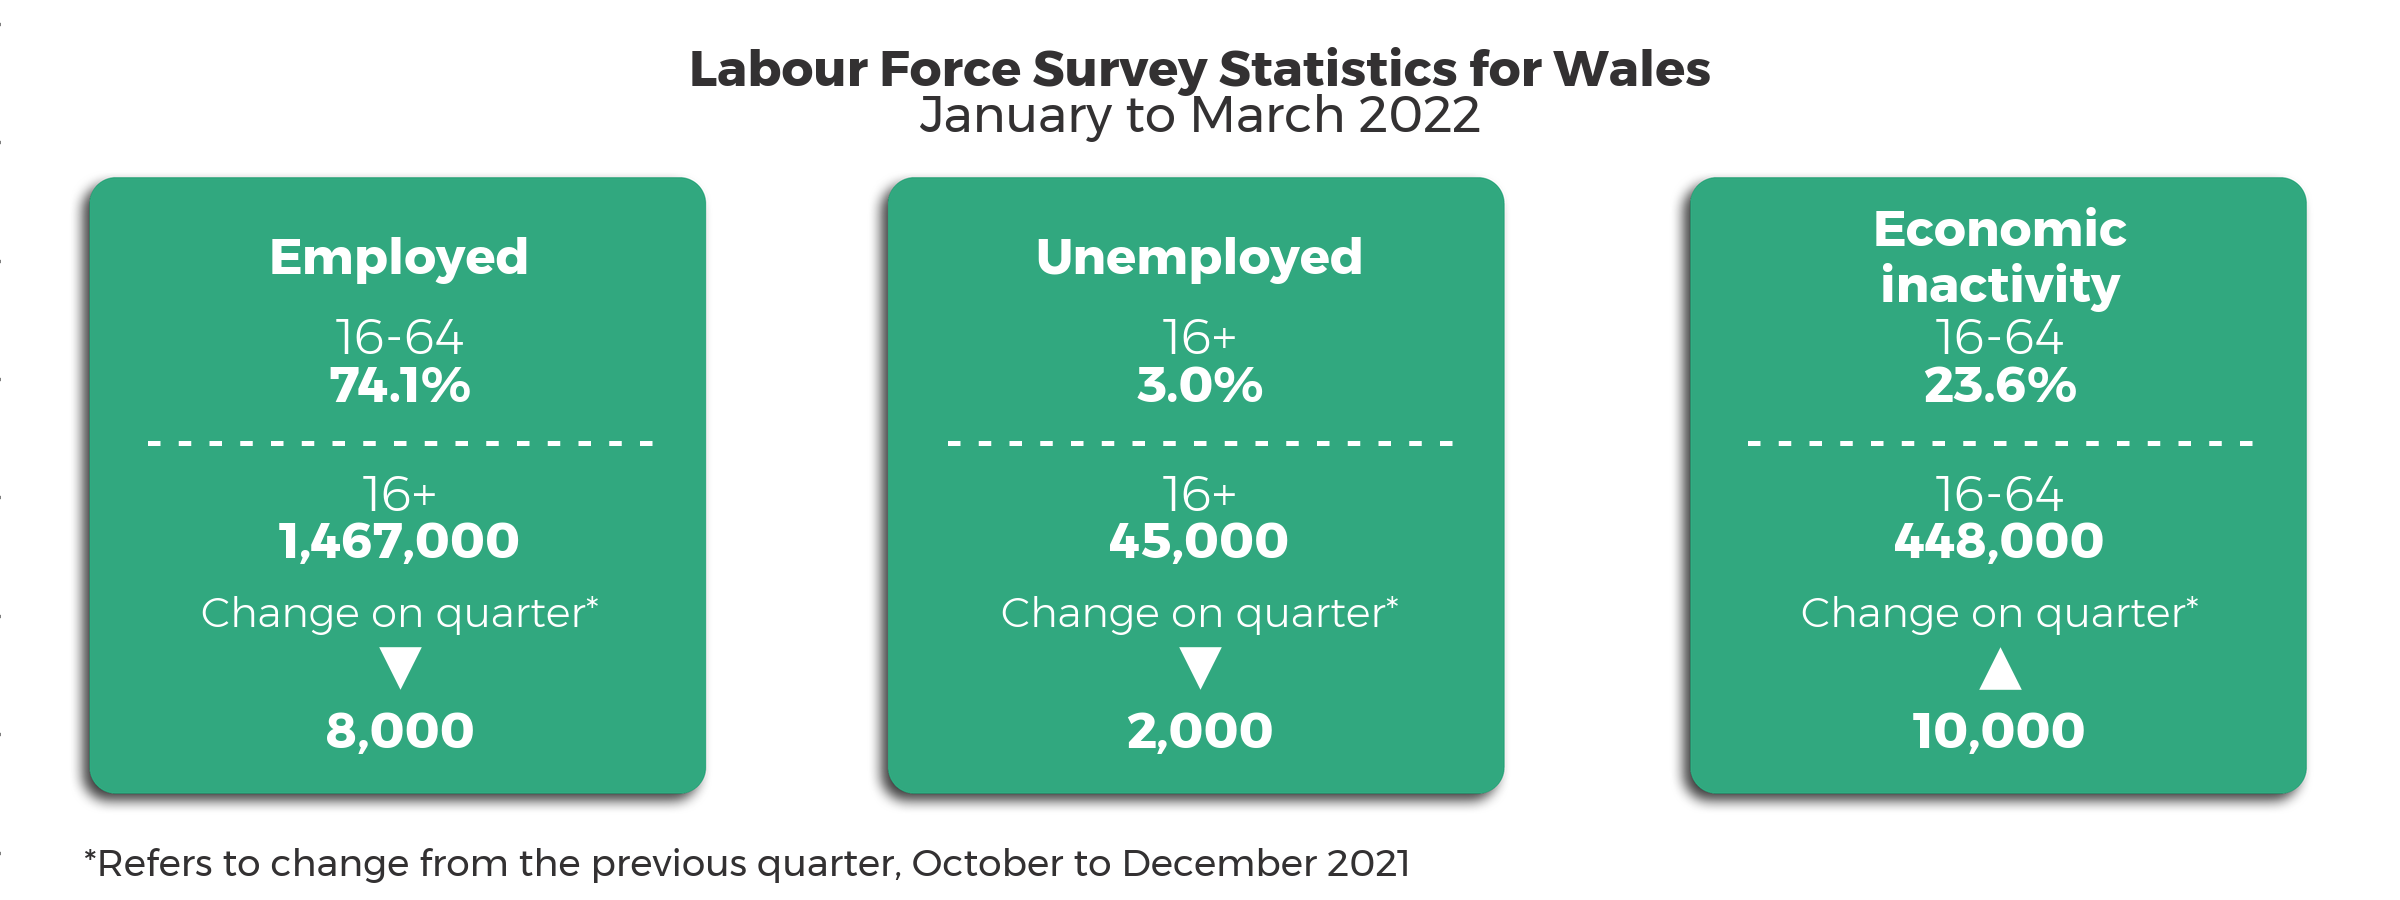 Headline statistics January 2022 to March 2022 compared to the previous quarter October 2021 to December 2021. The 16+ unemployment rate is 3.0% with 45,000 people unemployed, a decrease of 2,000 from the previous quarter. The 16-64 employment rate is 74.1%. 1,467,000 people aged 16+ employed, a decrease of 8,000 from the previous quarter. The 16-64 economic inactivity rate is 23.6% with 448,000 people economically inactive, an increase of 10,000 on the previous quarter.